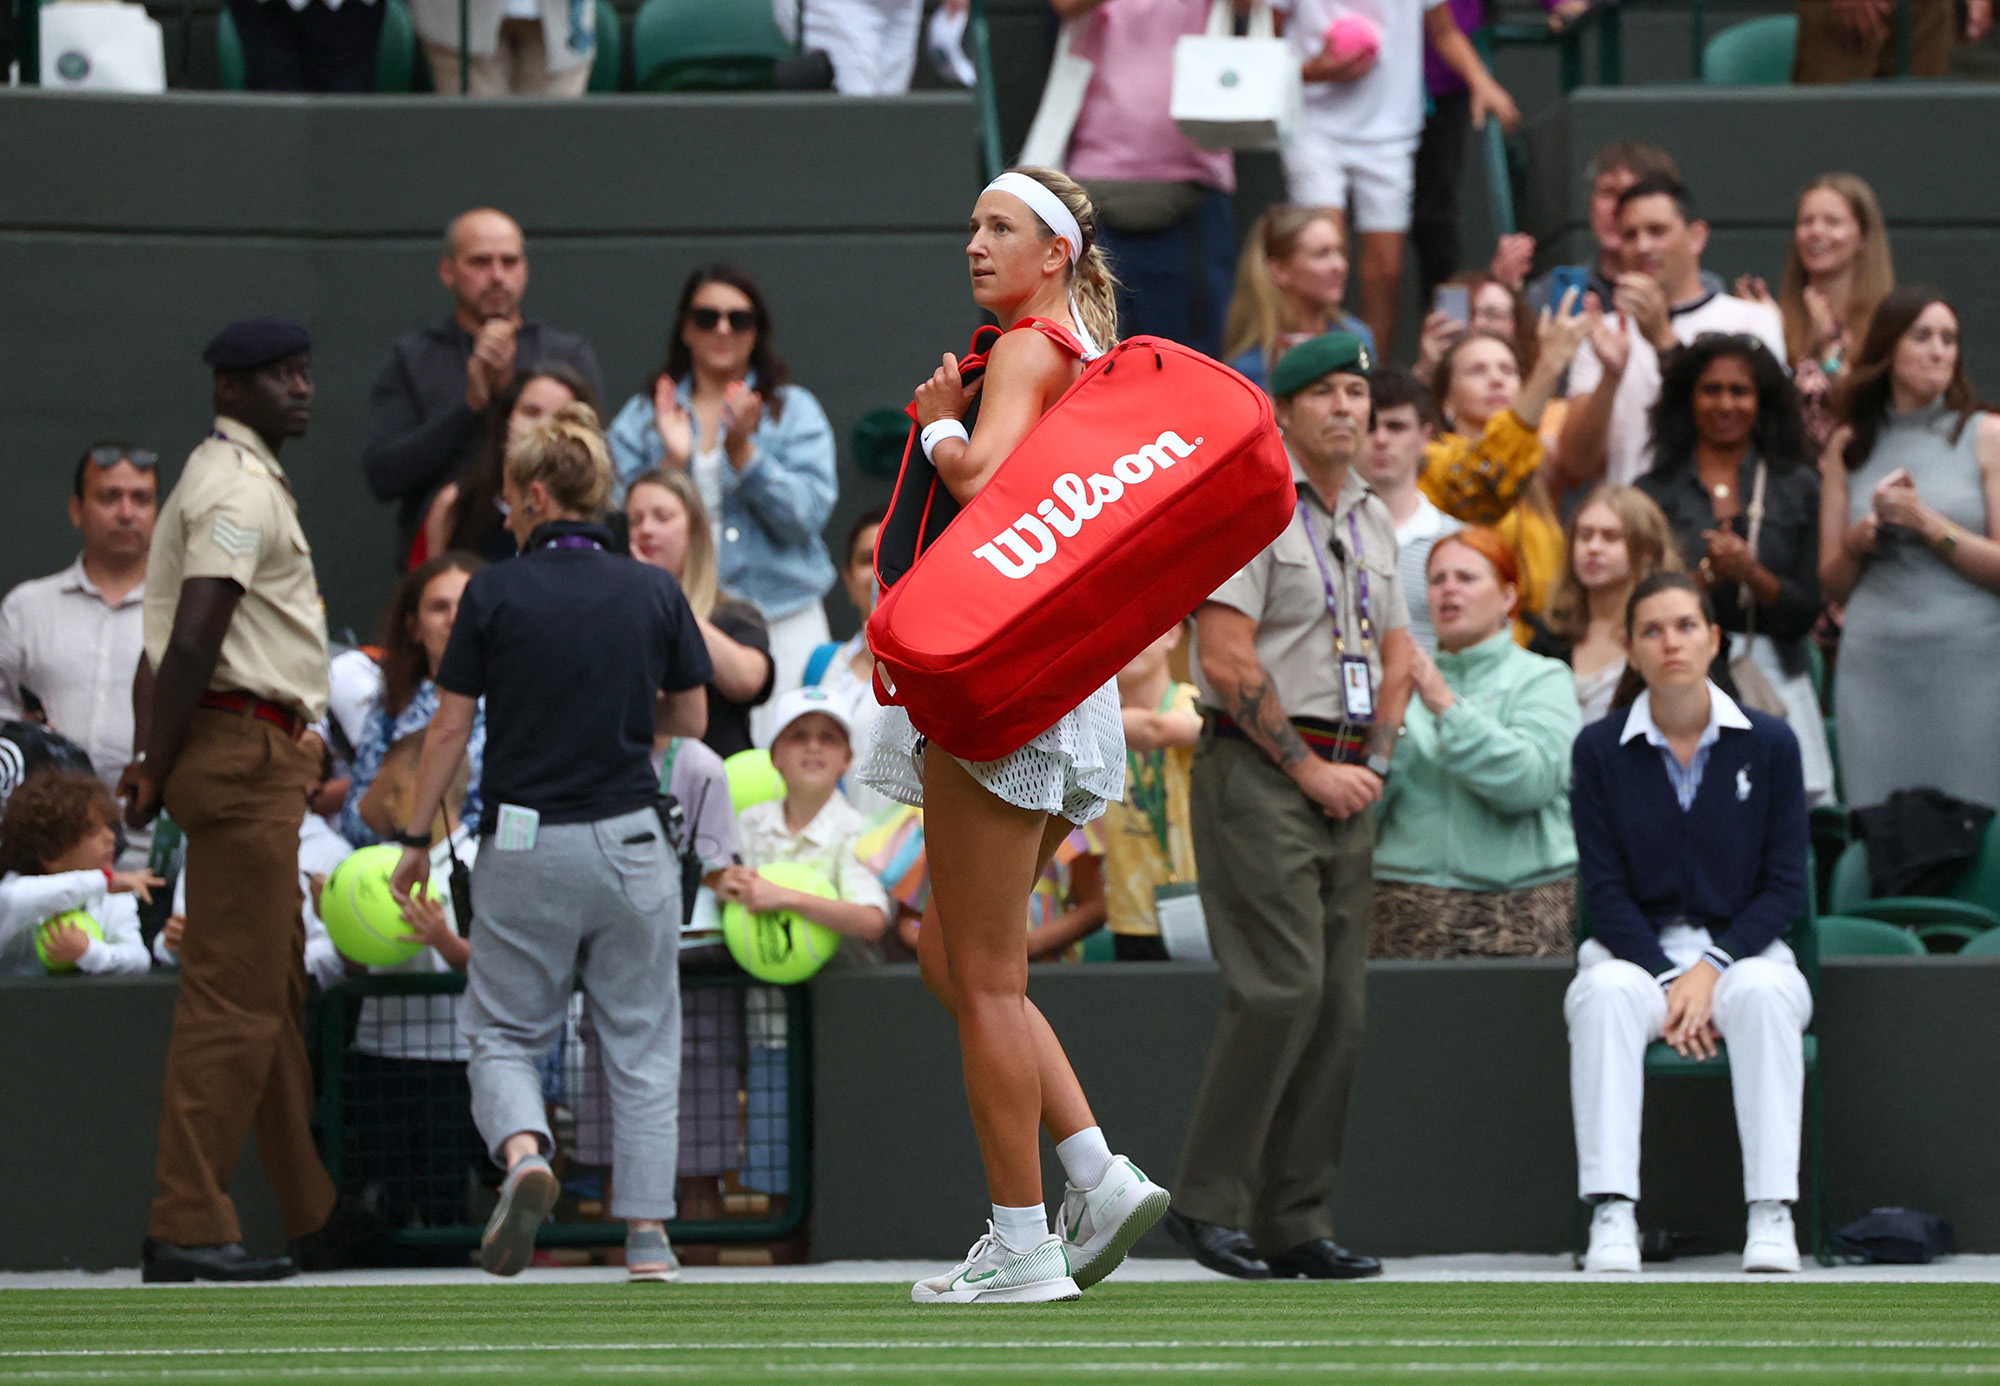 Belarus' Victoria Azarenka reacts to spectators as she leaves the court after losing her fourth round match against Ukraine's Elina Svitolina at Wimbledon, on July 9.